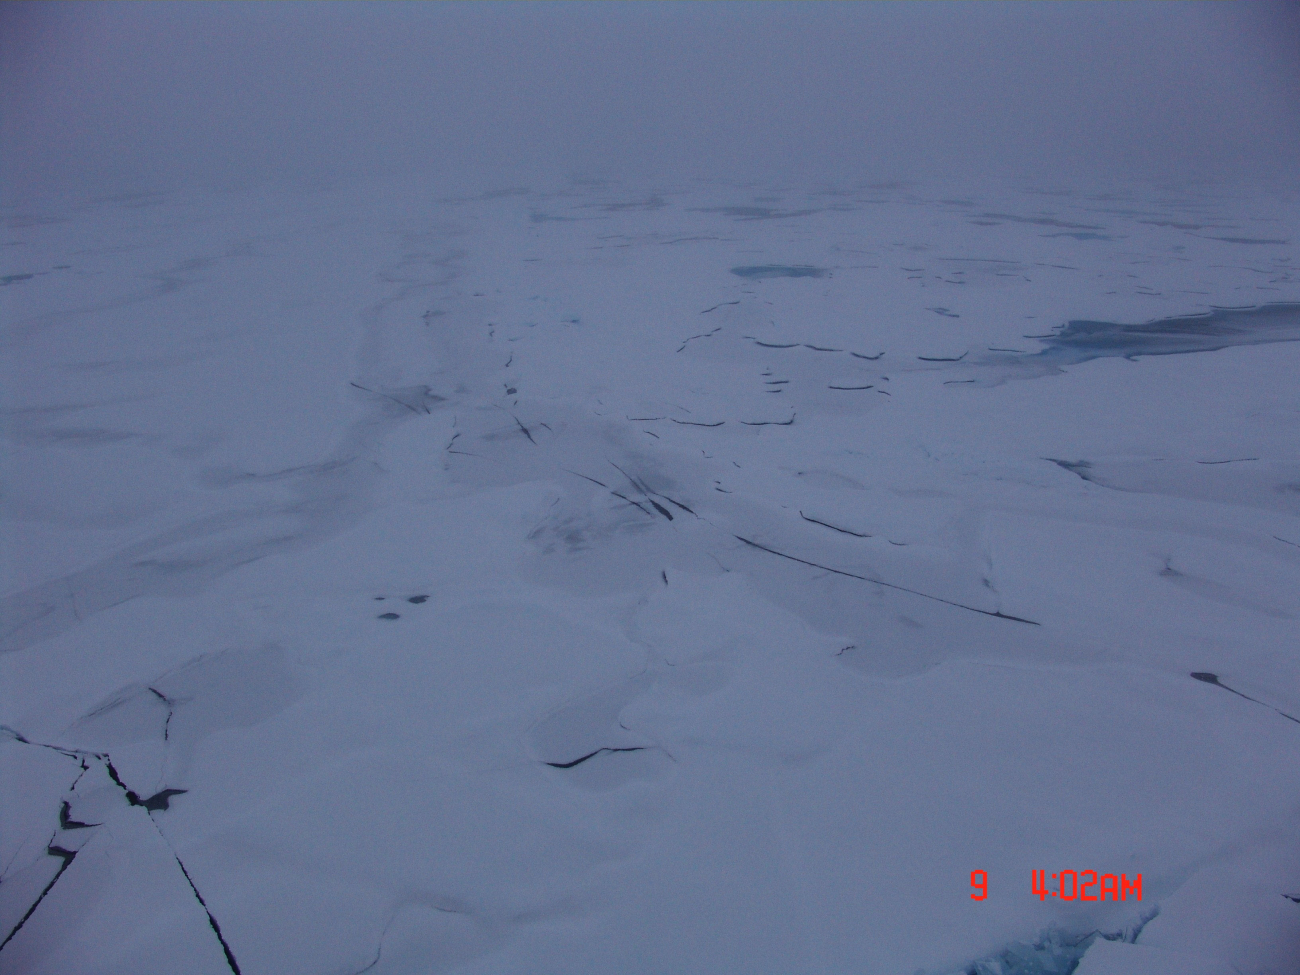 An area that has almost completely refrozen with snow covering refrozen andnew ice areas